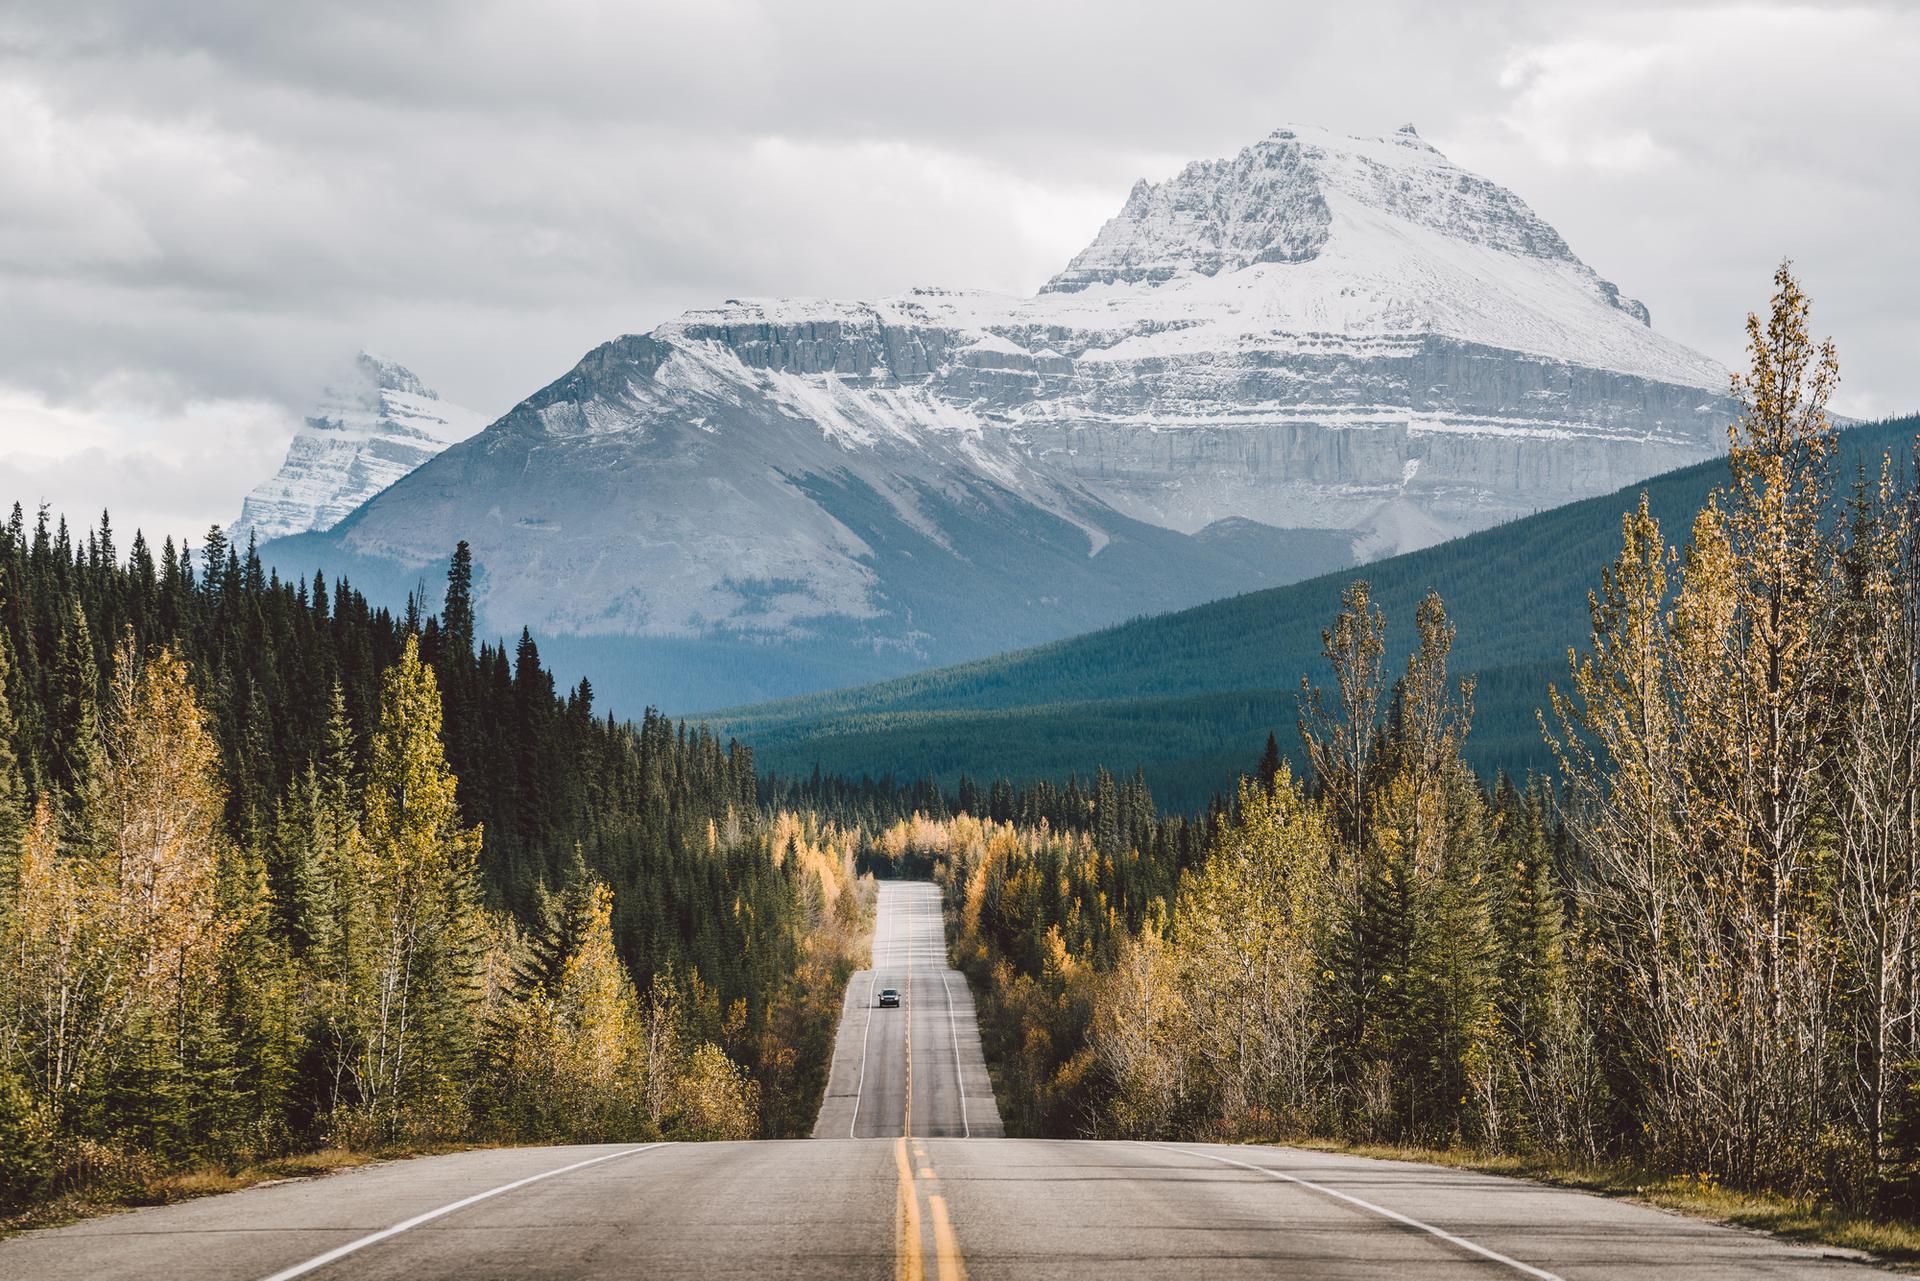 The Icefield Parkway in Jasper National Park.